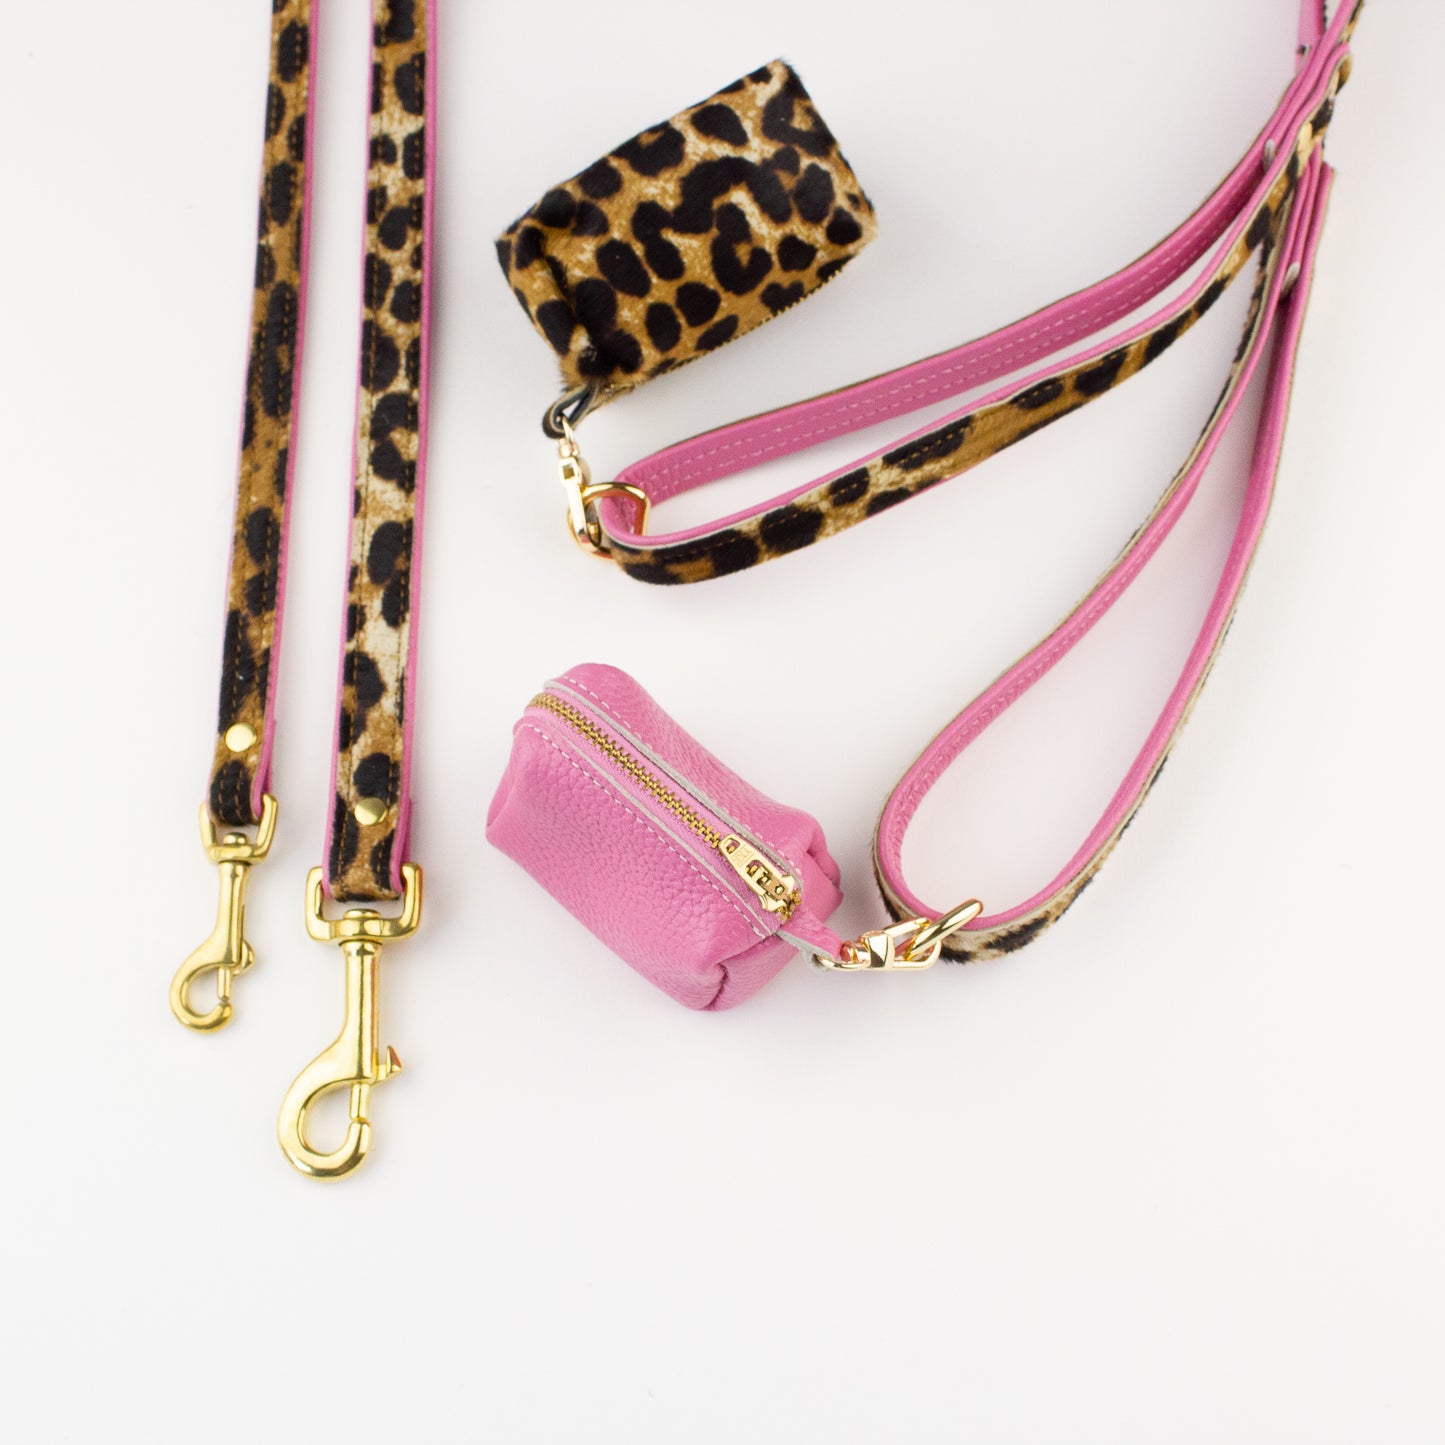 Pink leopard leather poo bag Willow Walks